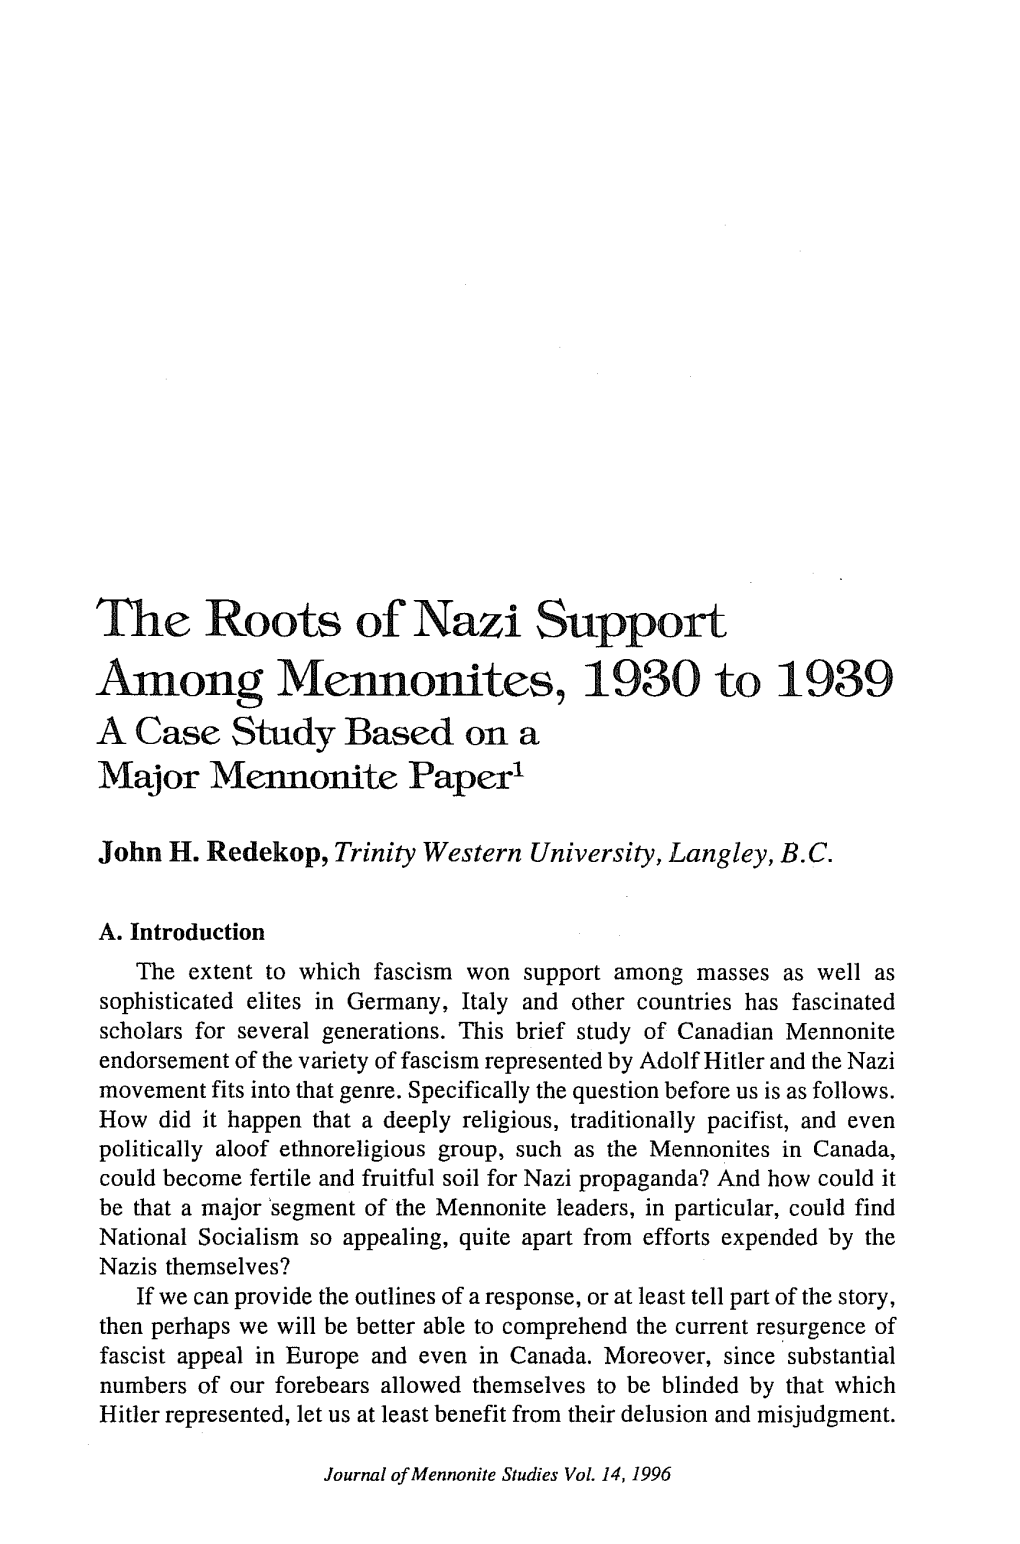 The Roots of Nazi Support Onites, 1930 to 1939 a Case Study Based on a Major Mennonite Paper1